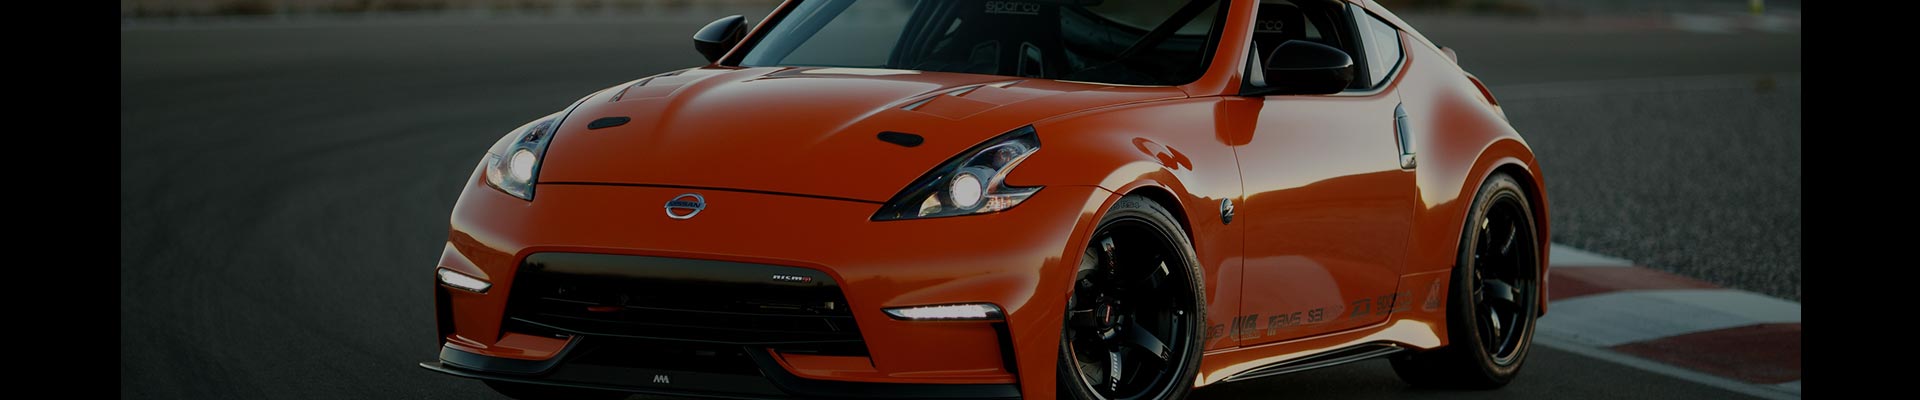 Shop Replacement and OEM Nissan 370Z Parts with Discounted Price on the Net